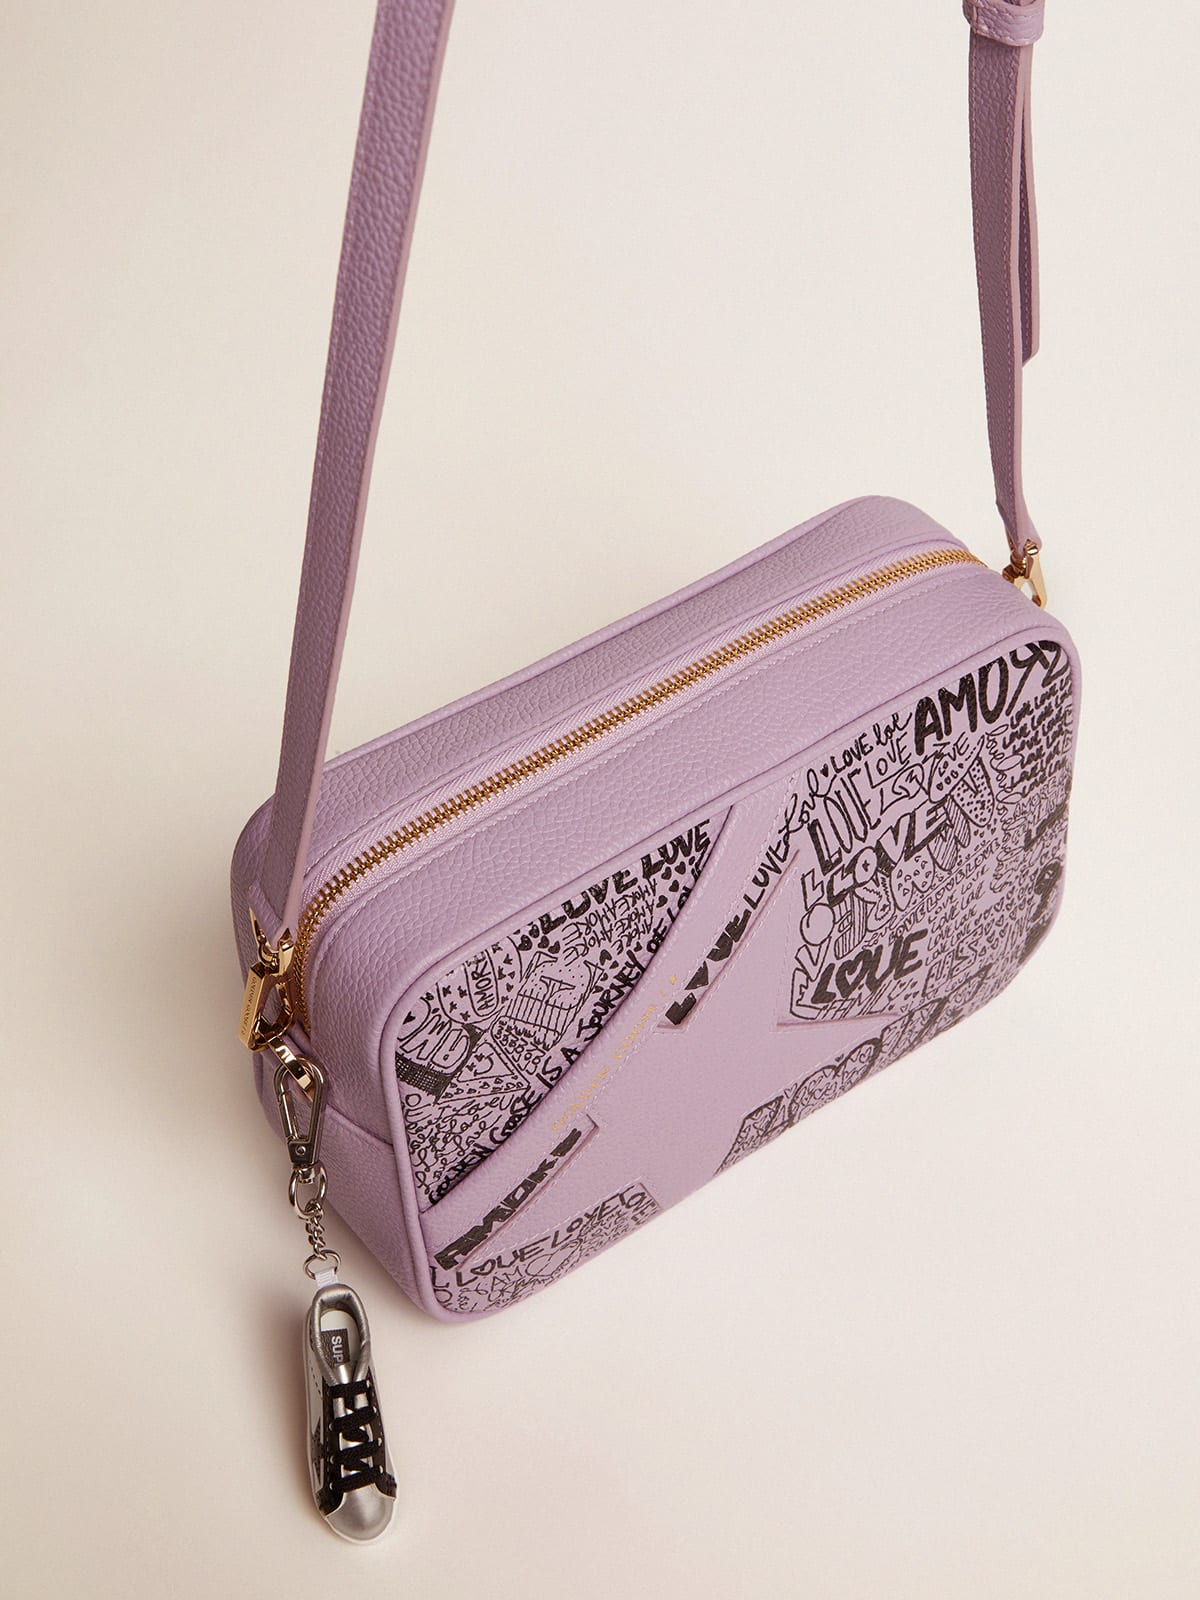 Golden Goose - Lilac hammered leather Star Bag with tone-on-tone leather star and black all-over graffiti print in 